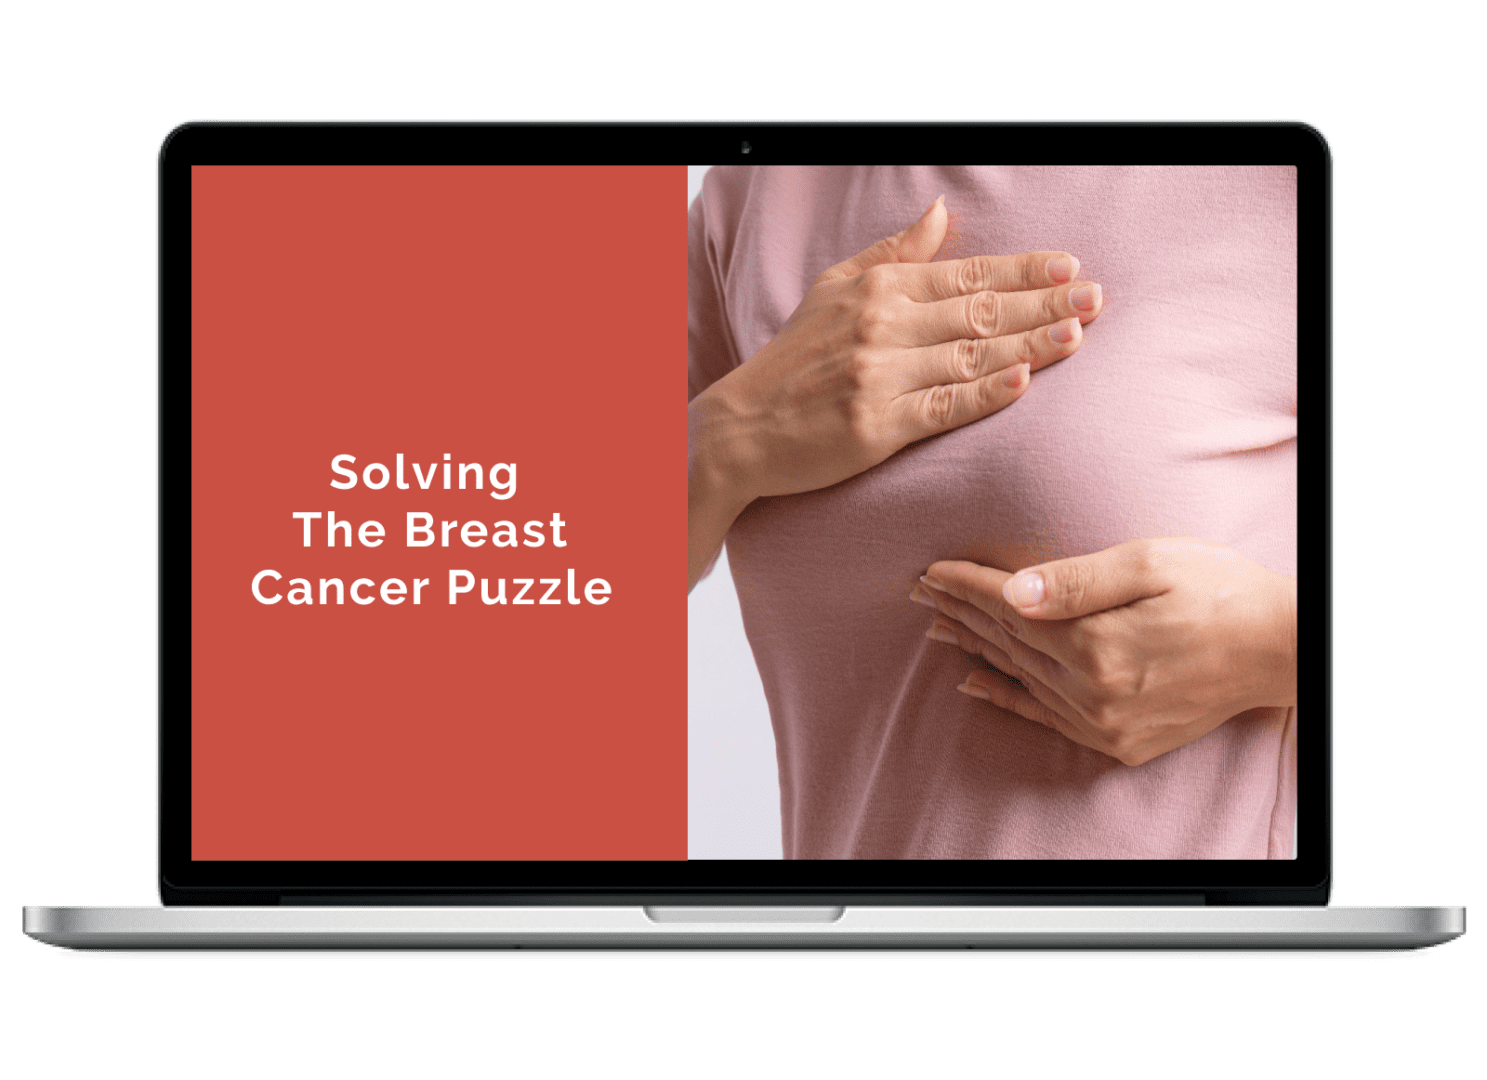 solving_the_breast_cancer_puzzle-banner_4@2x